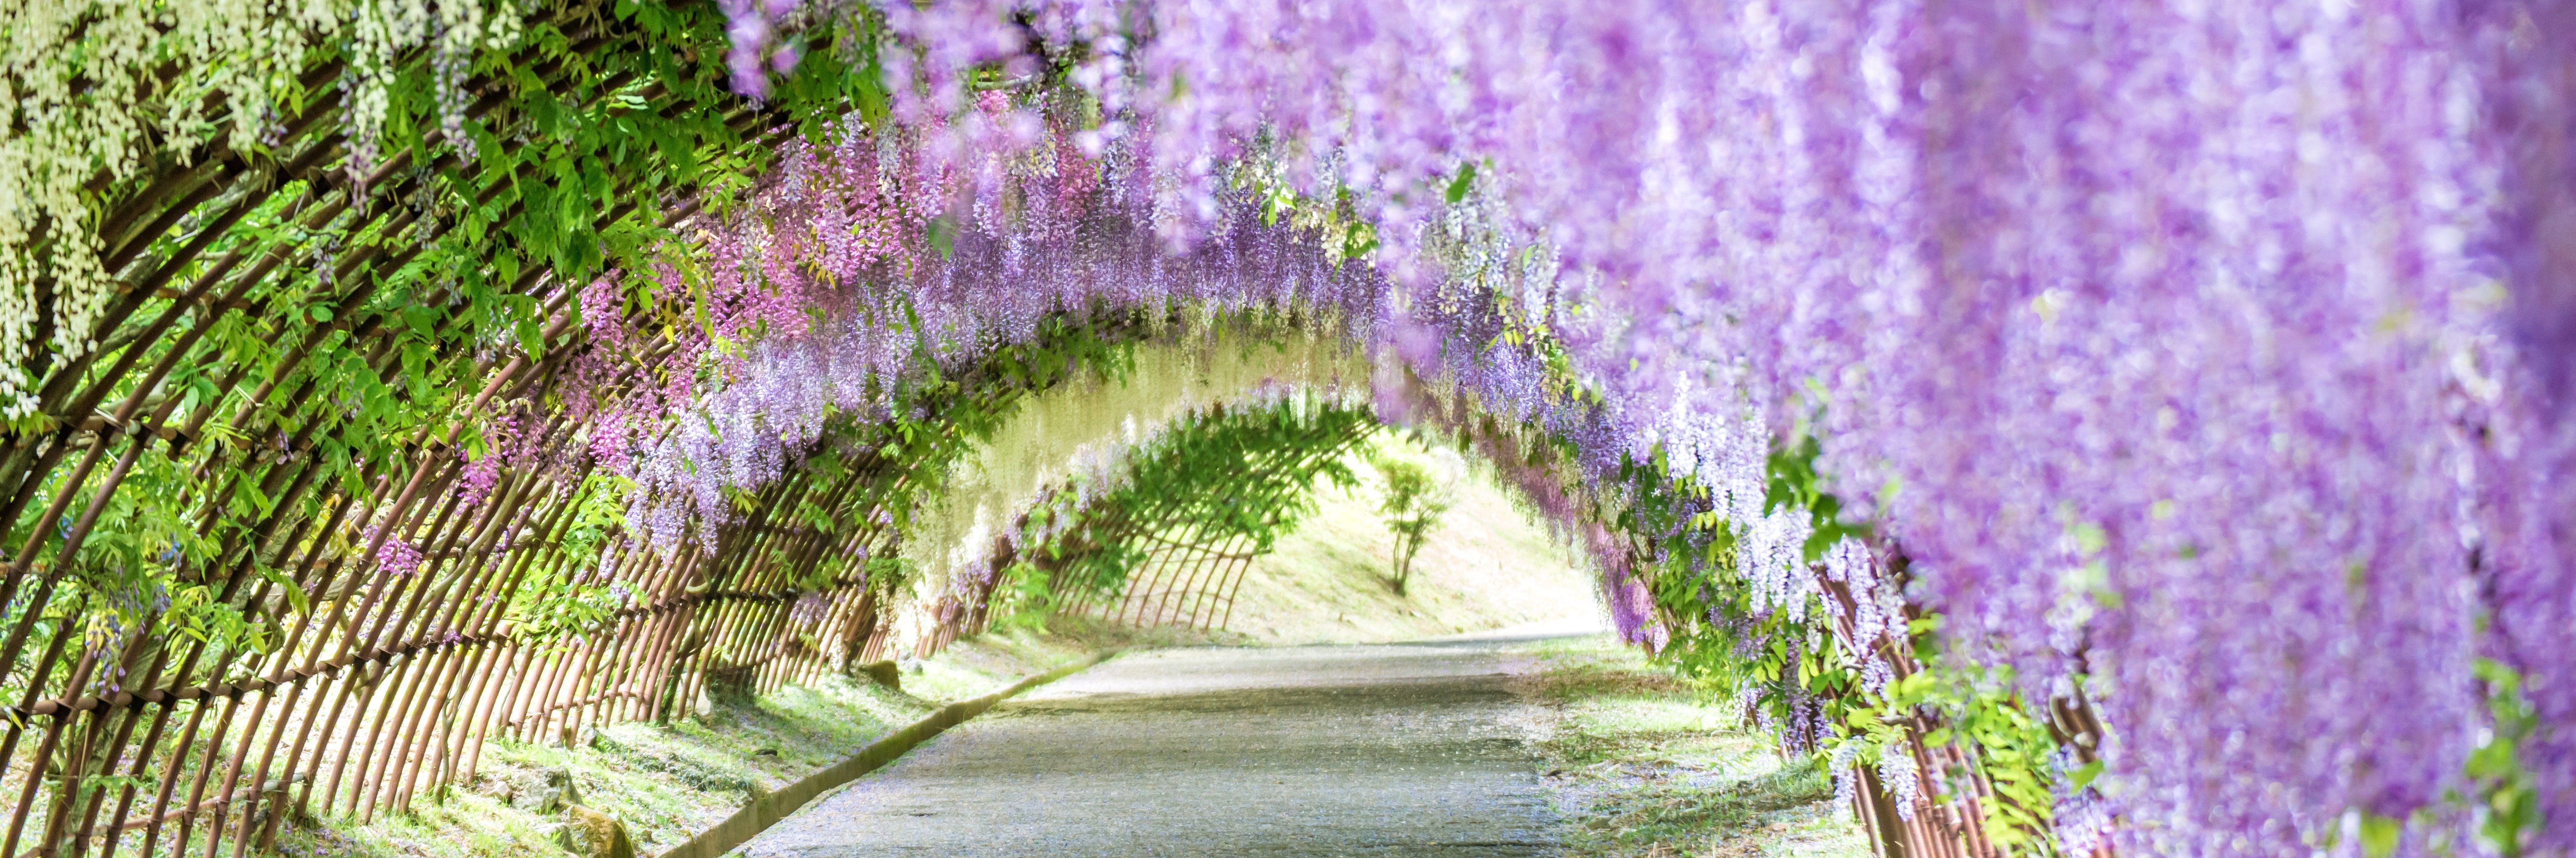 Spring Flower Picture from Around the World. Condé Nast Traveler